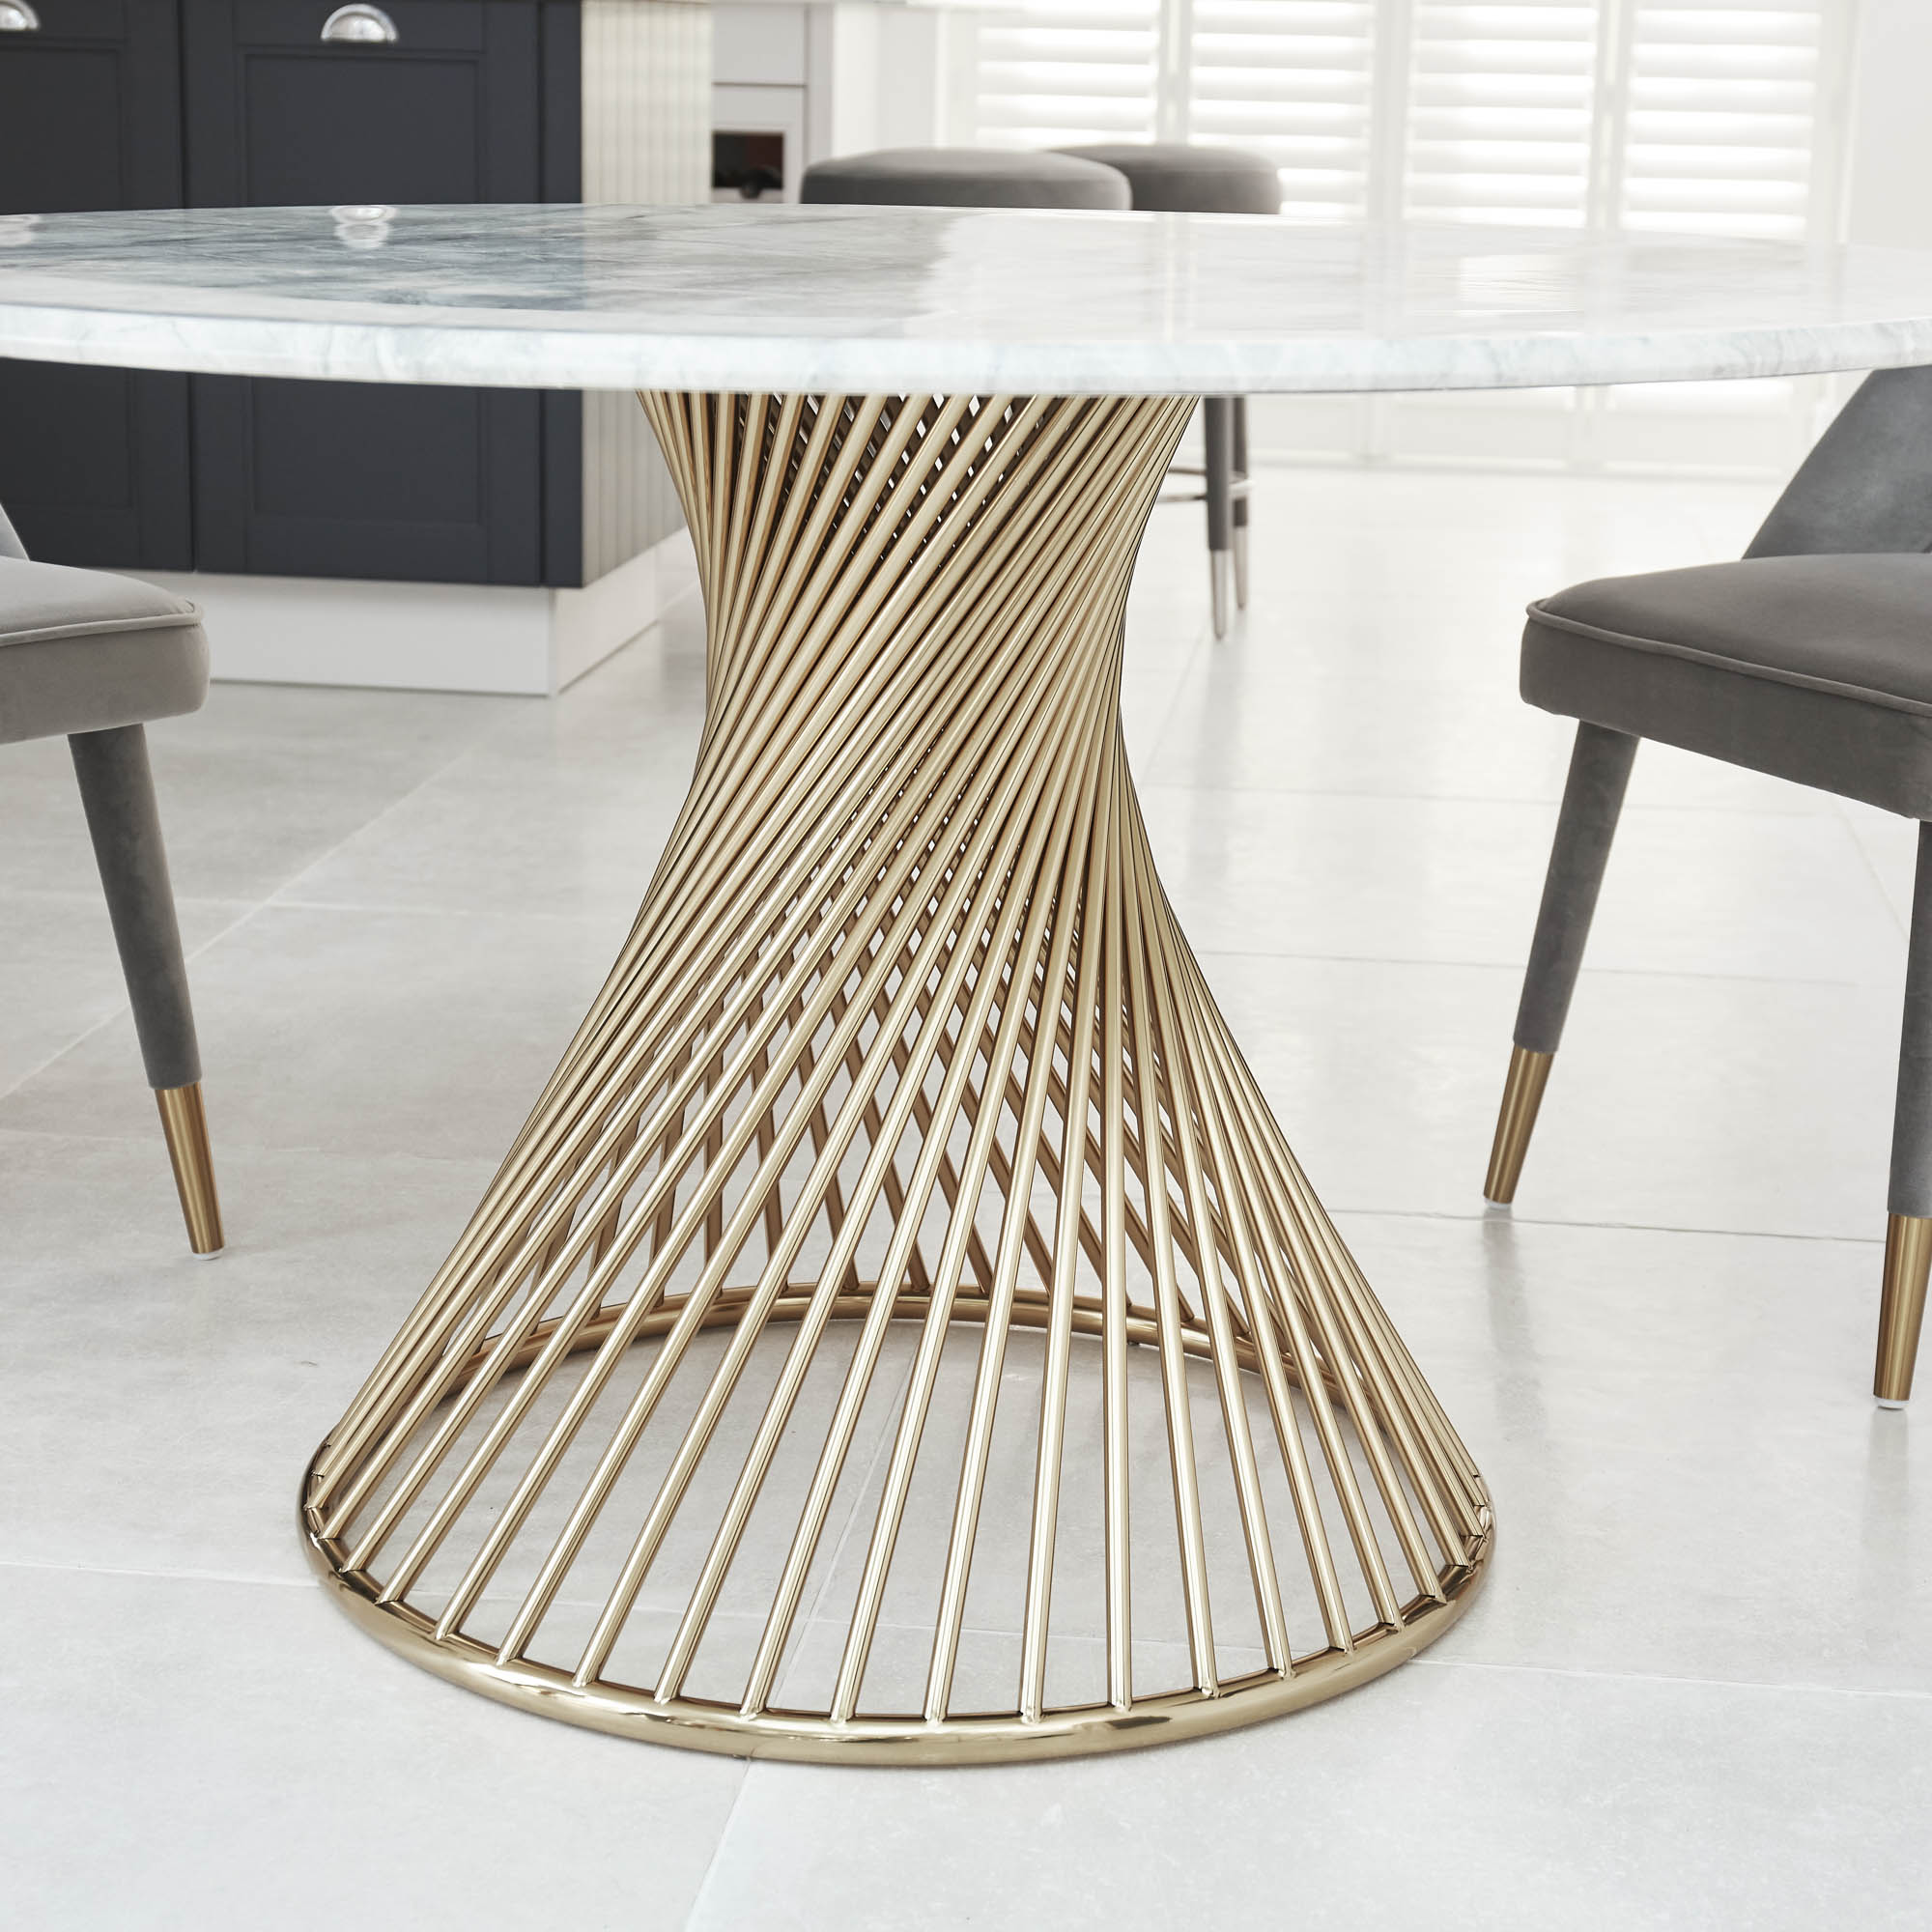 1.3M Cylinder Pedestal Circular Gold Stainless Steel Dining Table with a White Faux Marble Top